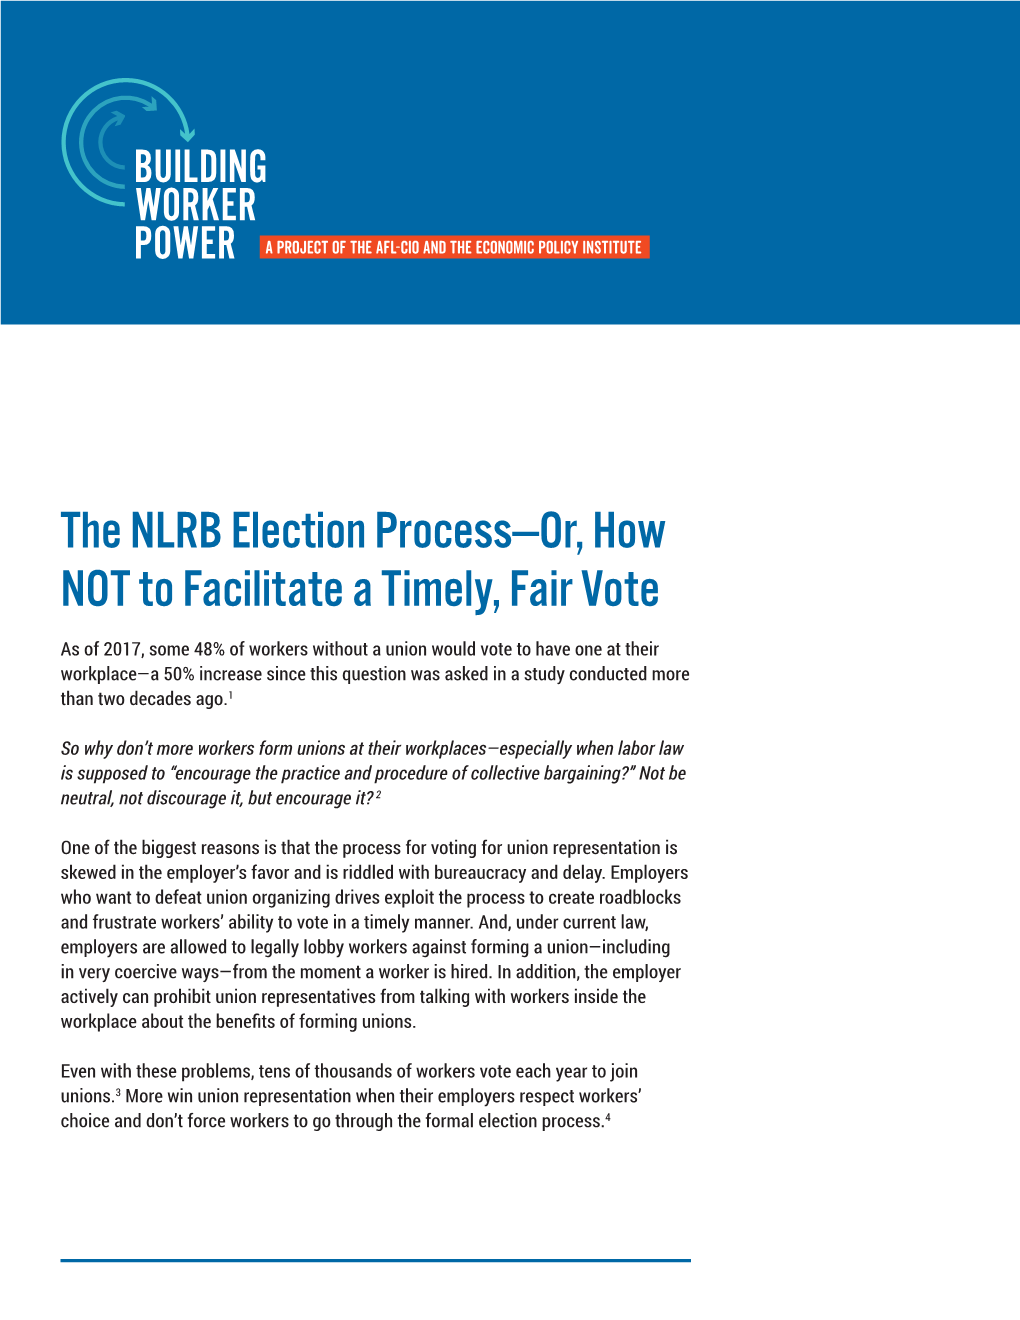 The NLRB Election Process—Or, How NOT to Facilitate a Timely, Fair Vote